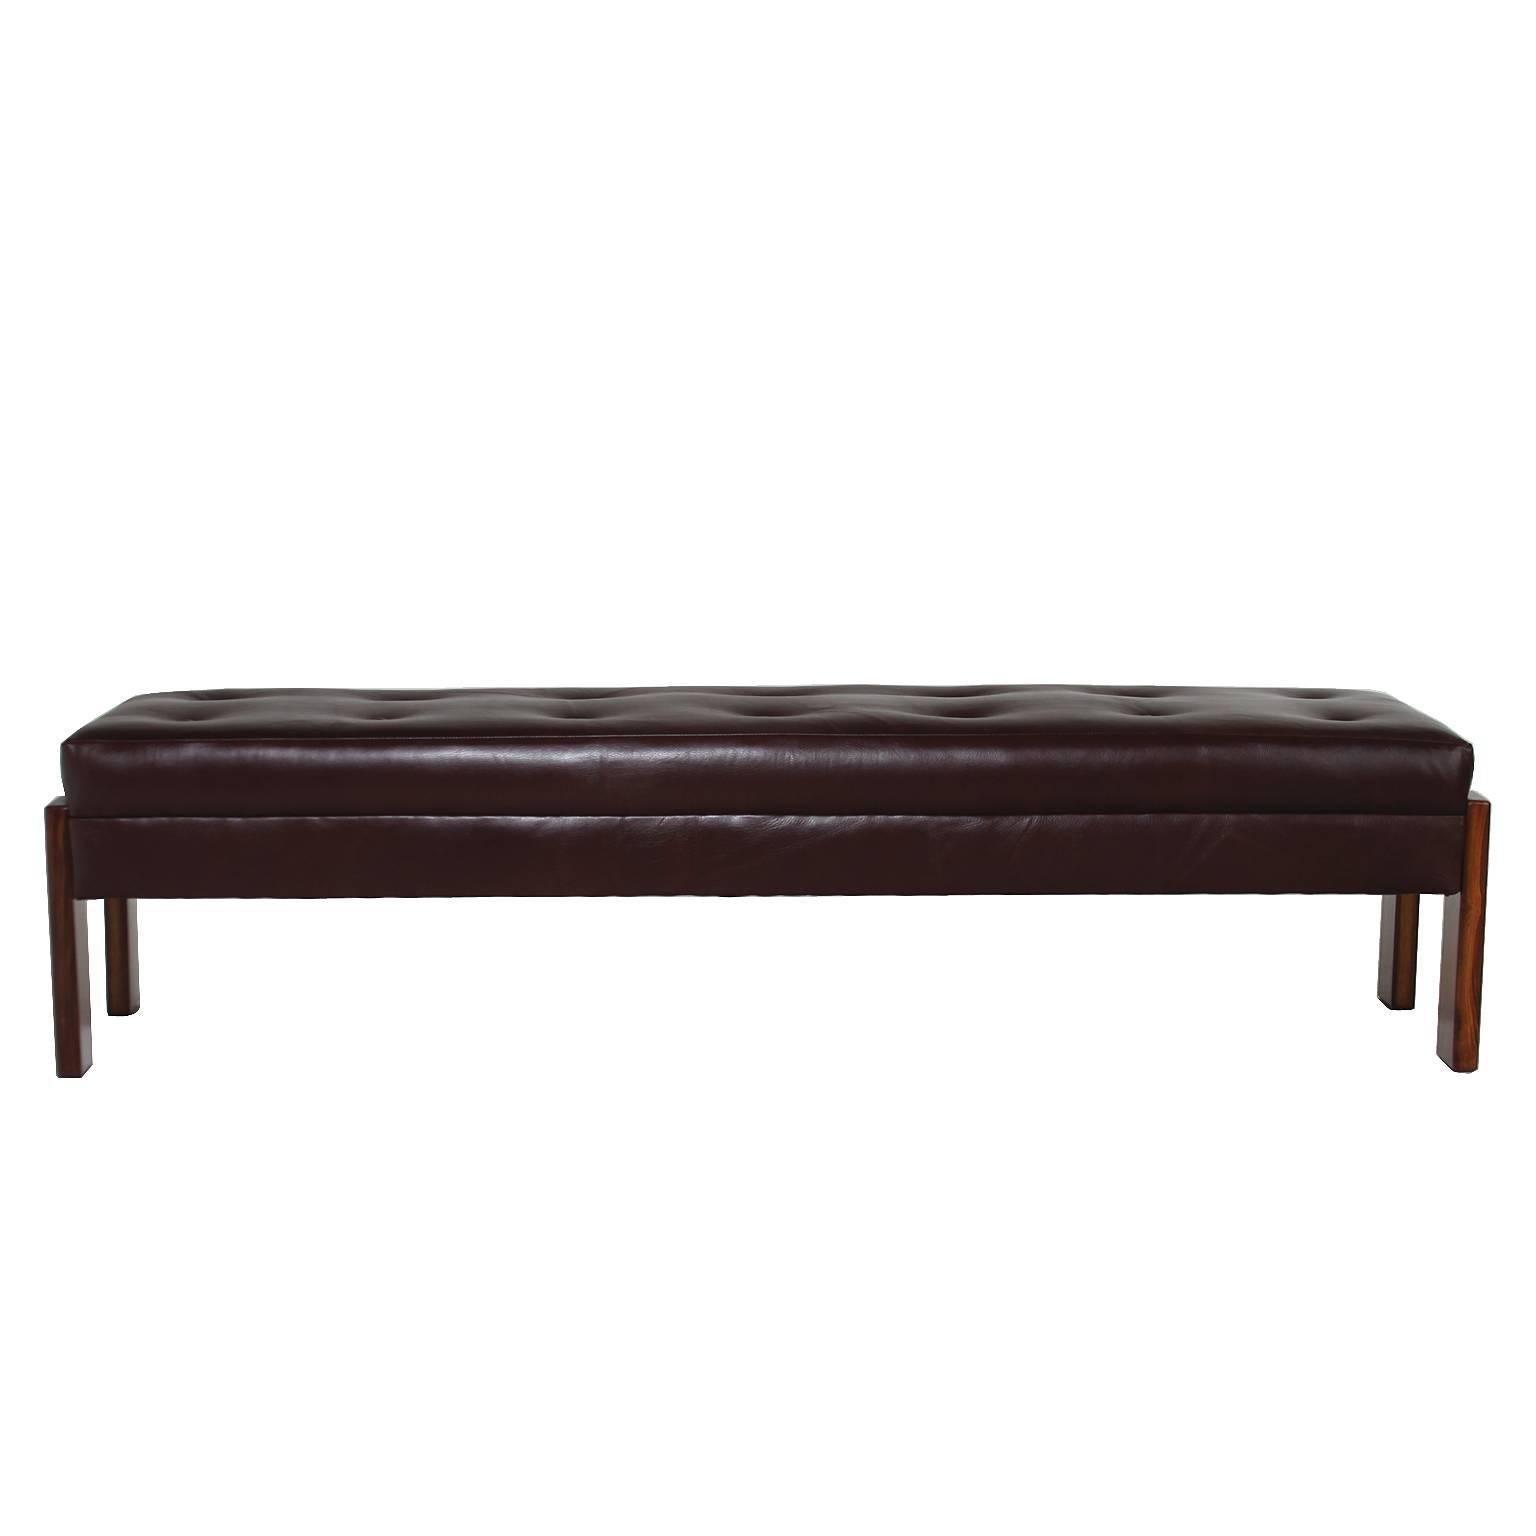 Bench by Jorge Zalszupin for L'Atelier with solid Caviuna wood sides and leather tufted seat. Many pieces are stored in our warehouse, so please click on 